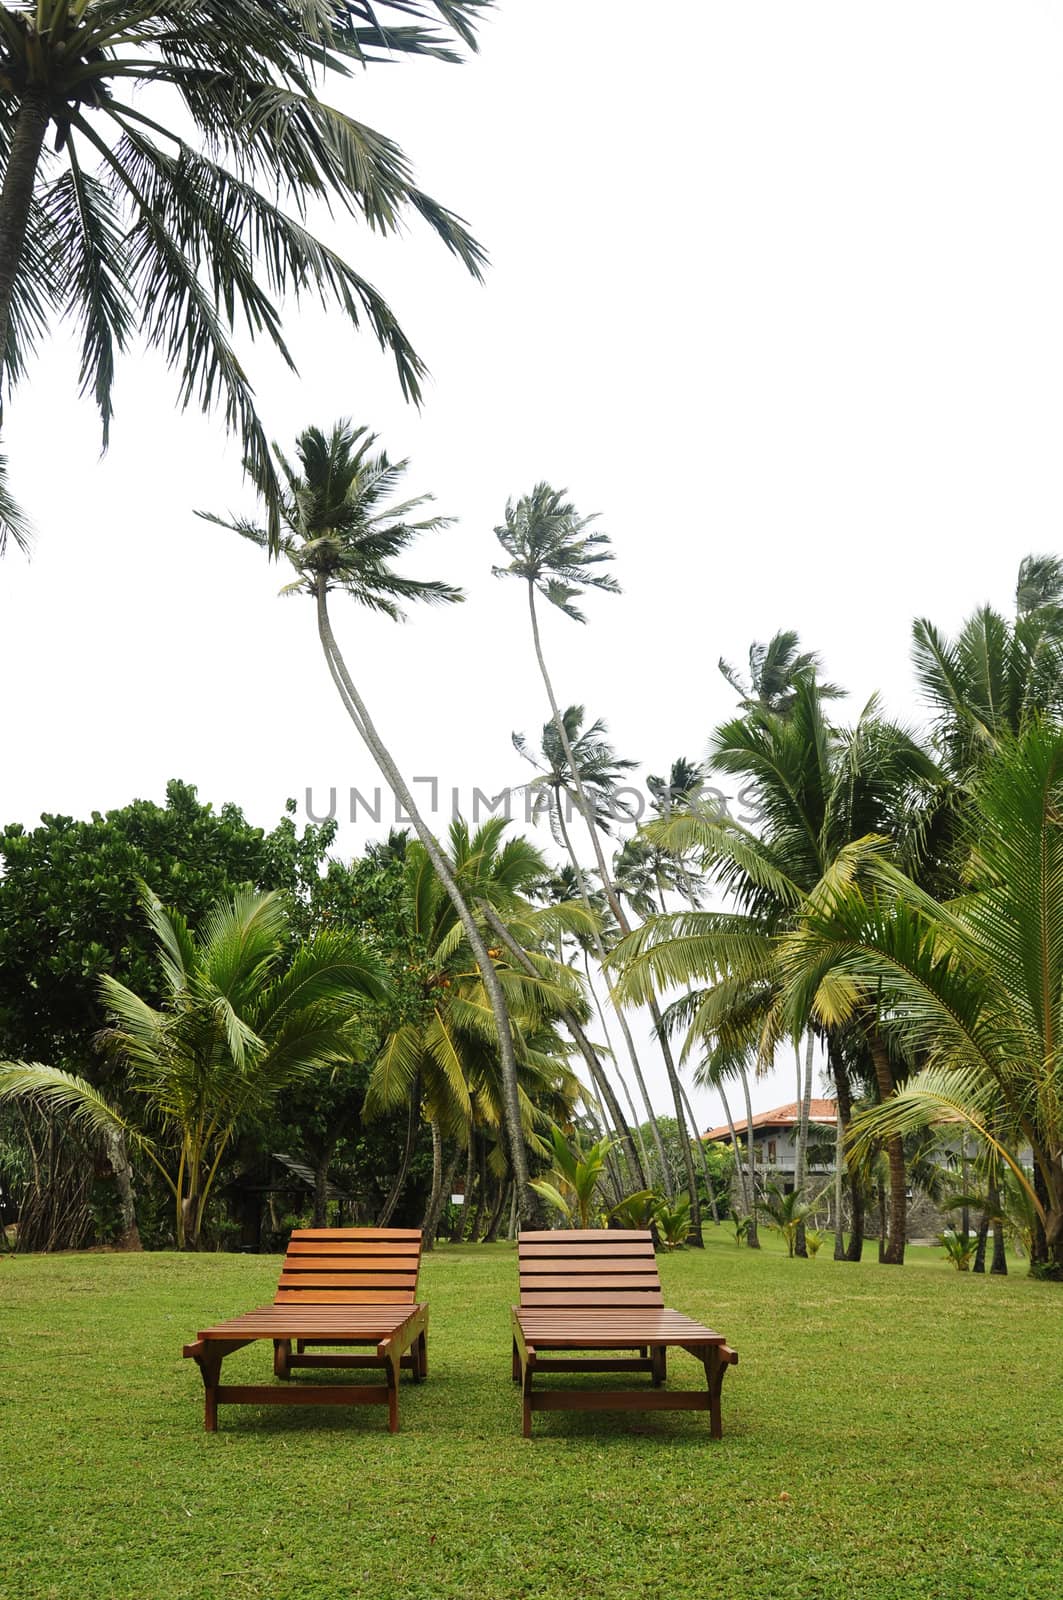 Two sunbeds in a lawn surrounded by palm trees on the coast, Sri Lanka